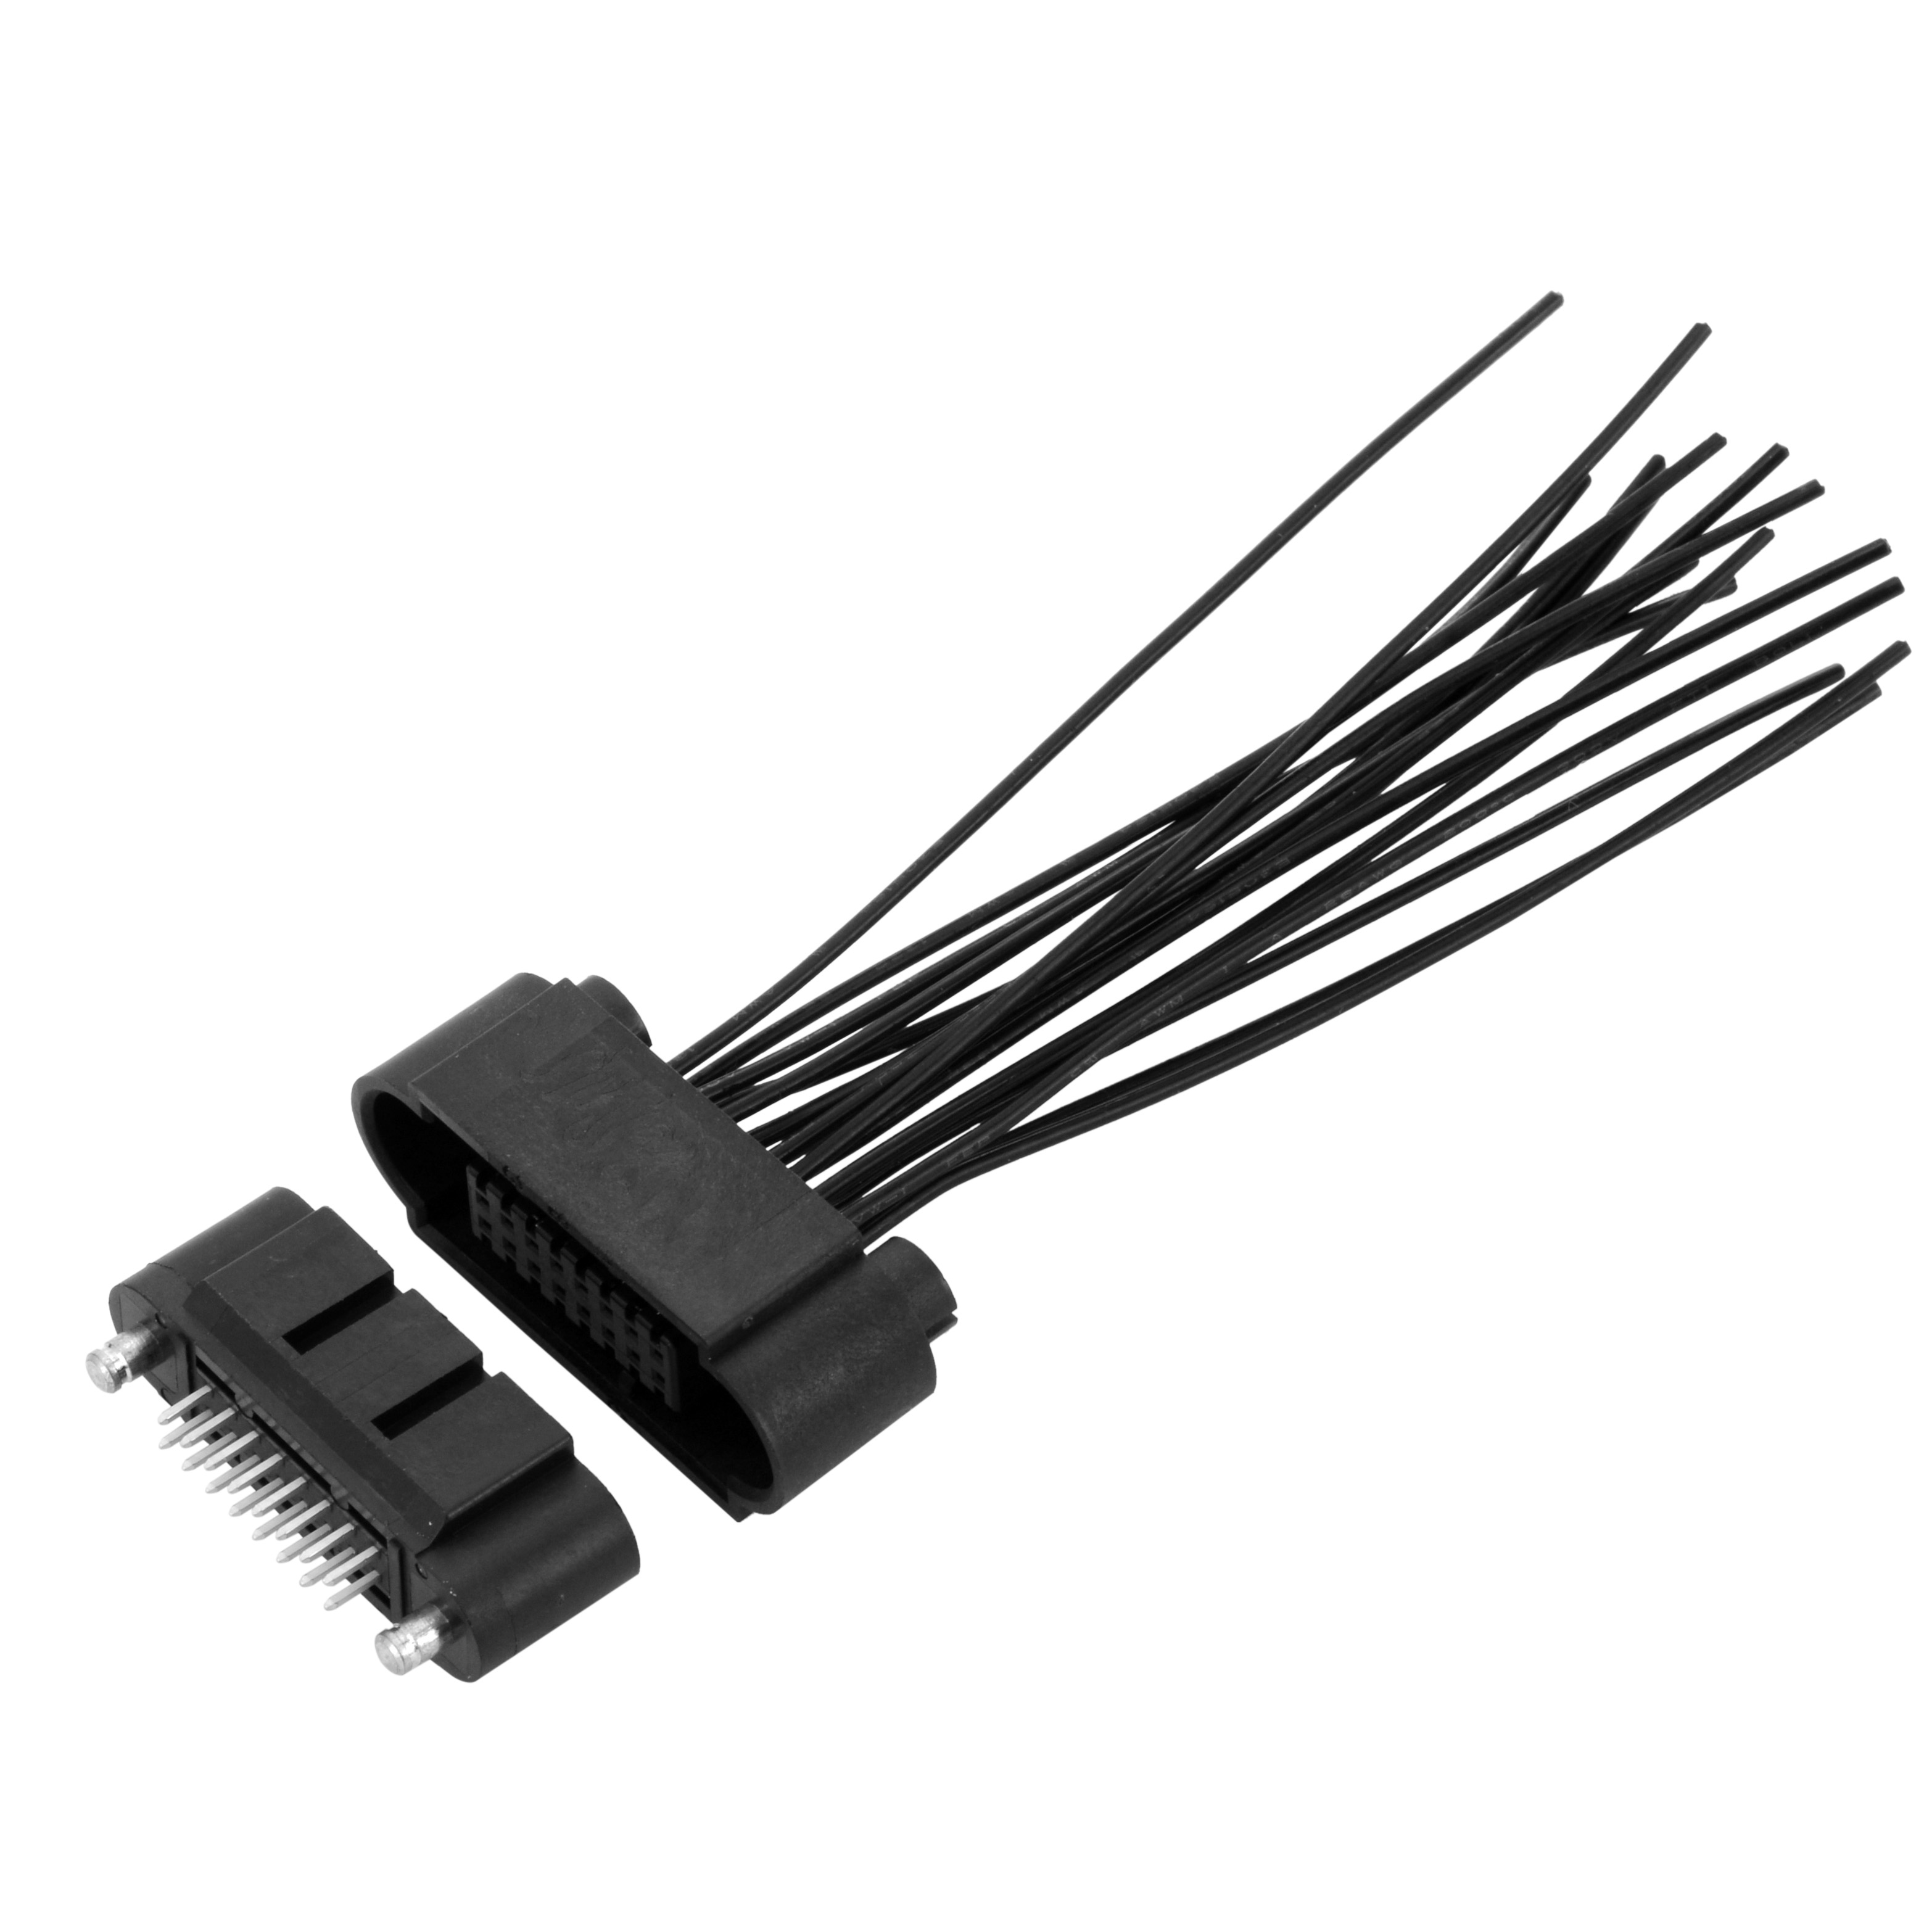 PHB connector